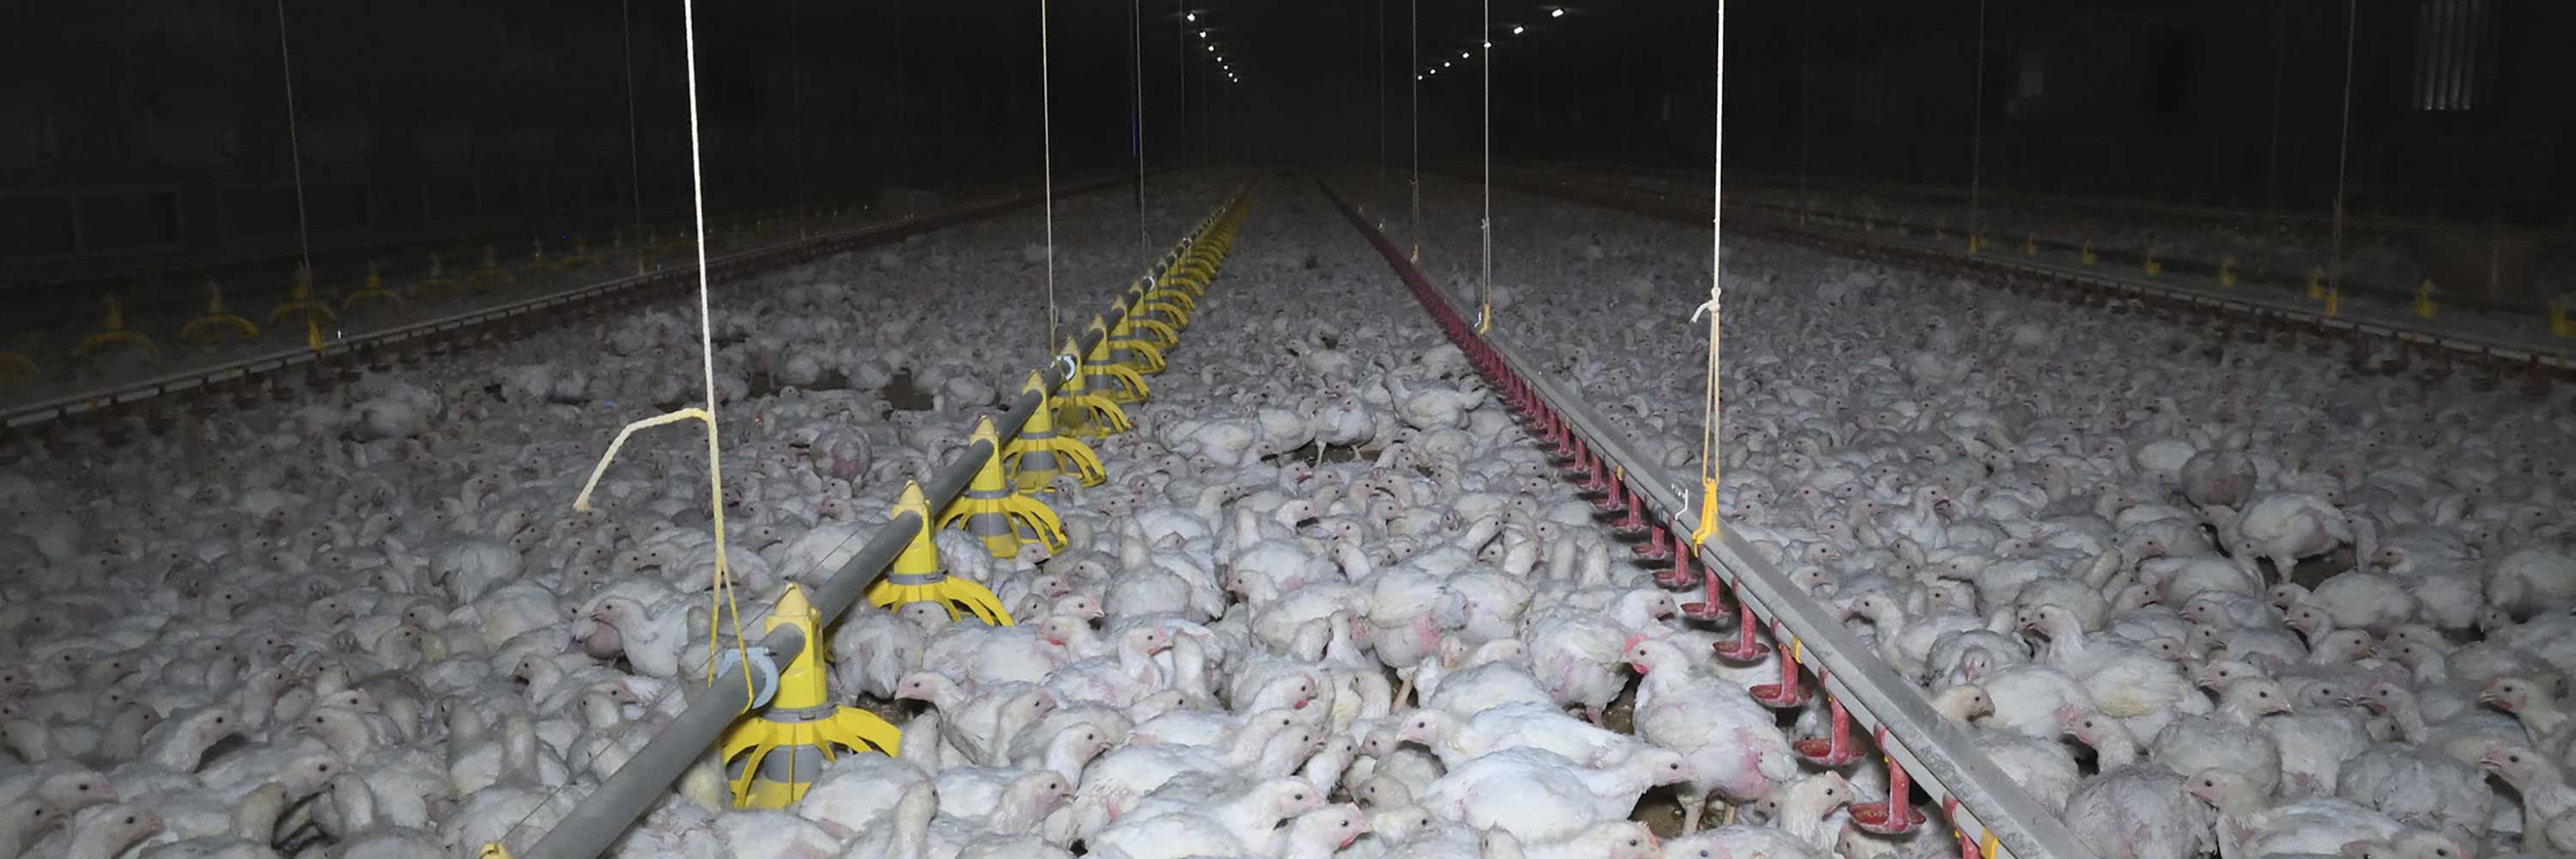 chickens, over crowded, factory farming